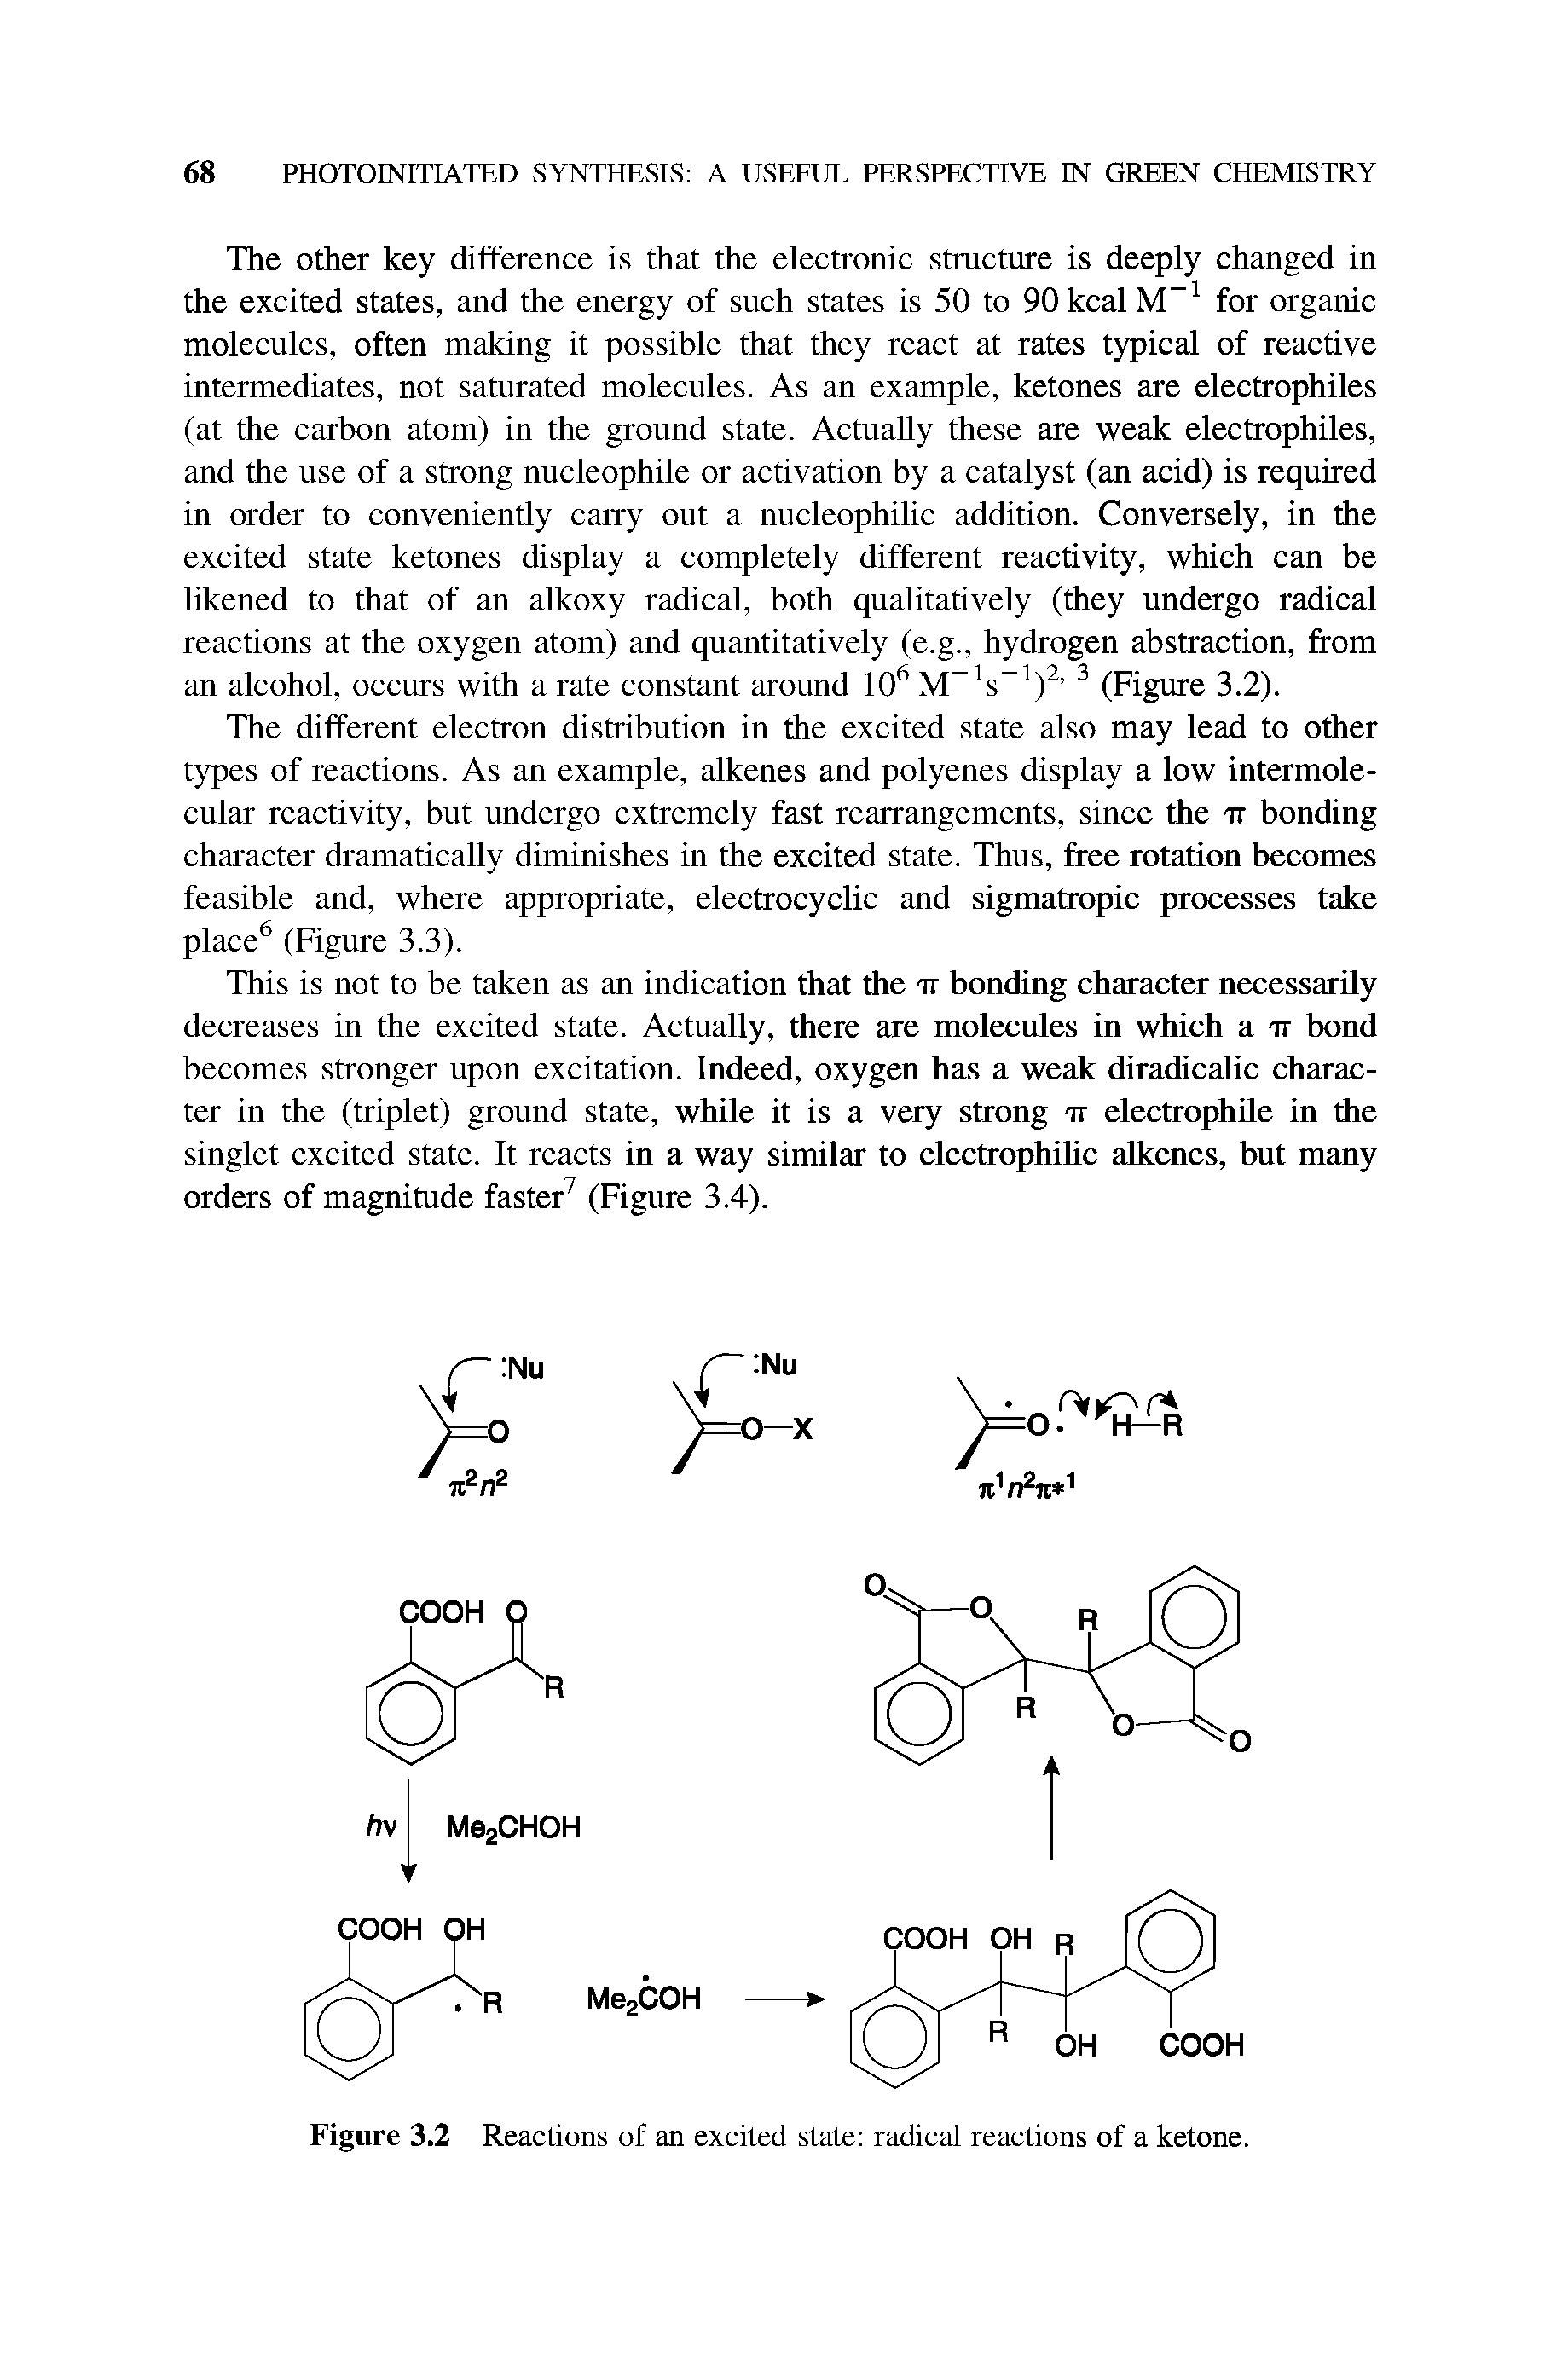 Figure 3.2 Reactions of an excited state radical reactions of a ketone.